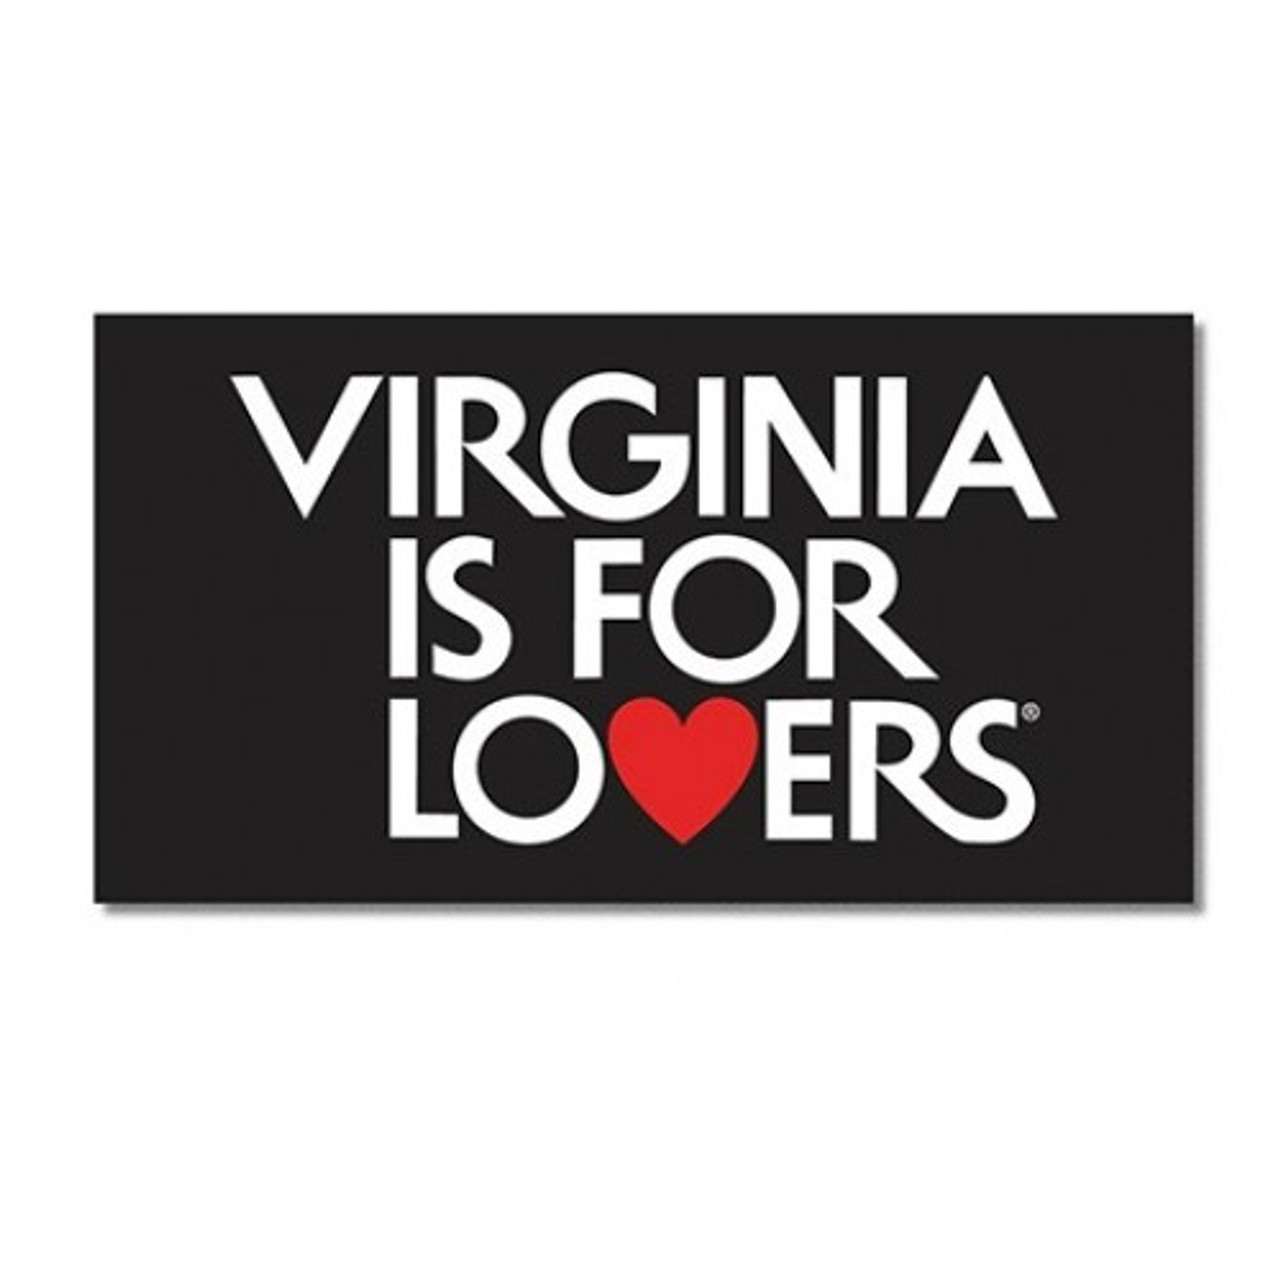 Virginia Is For Lovers Bumper Sticker 6596